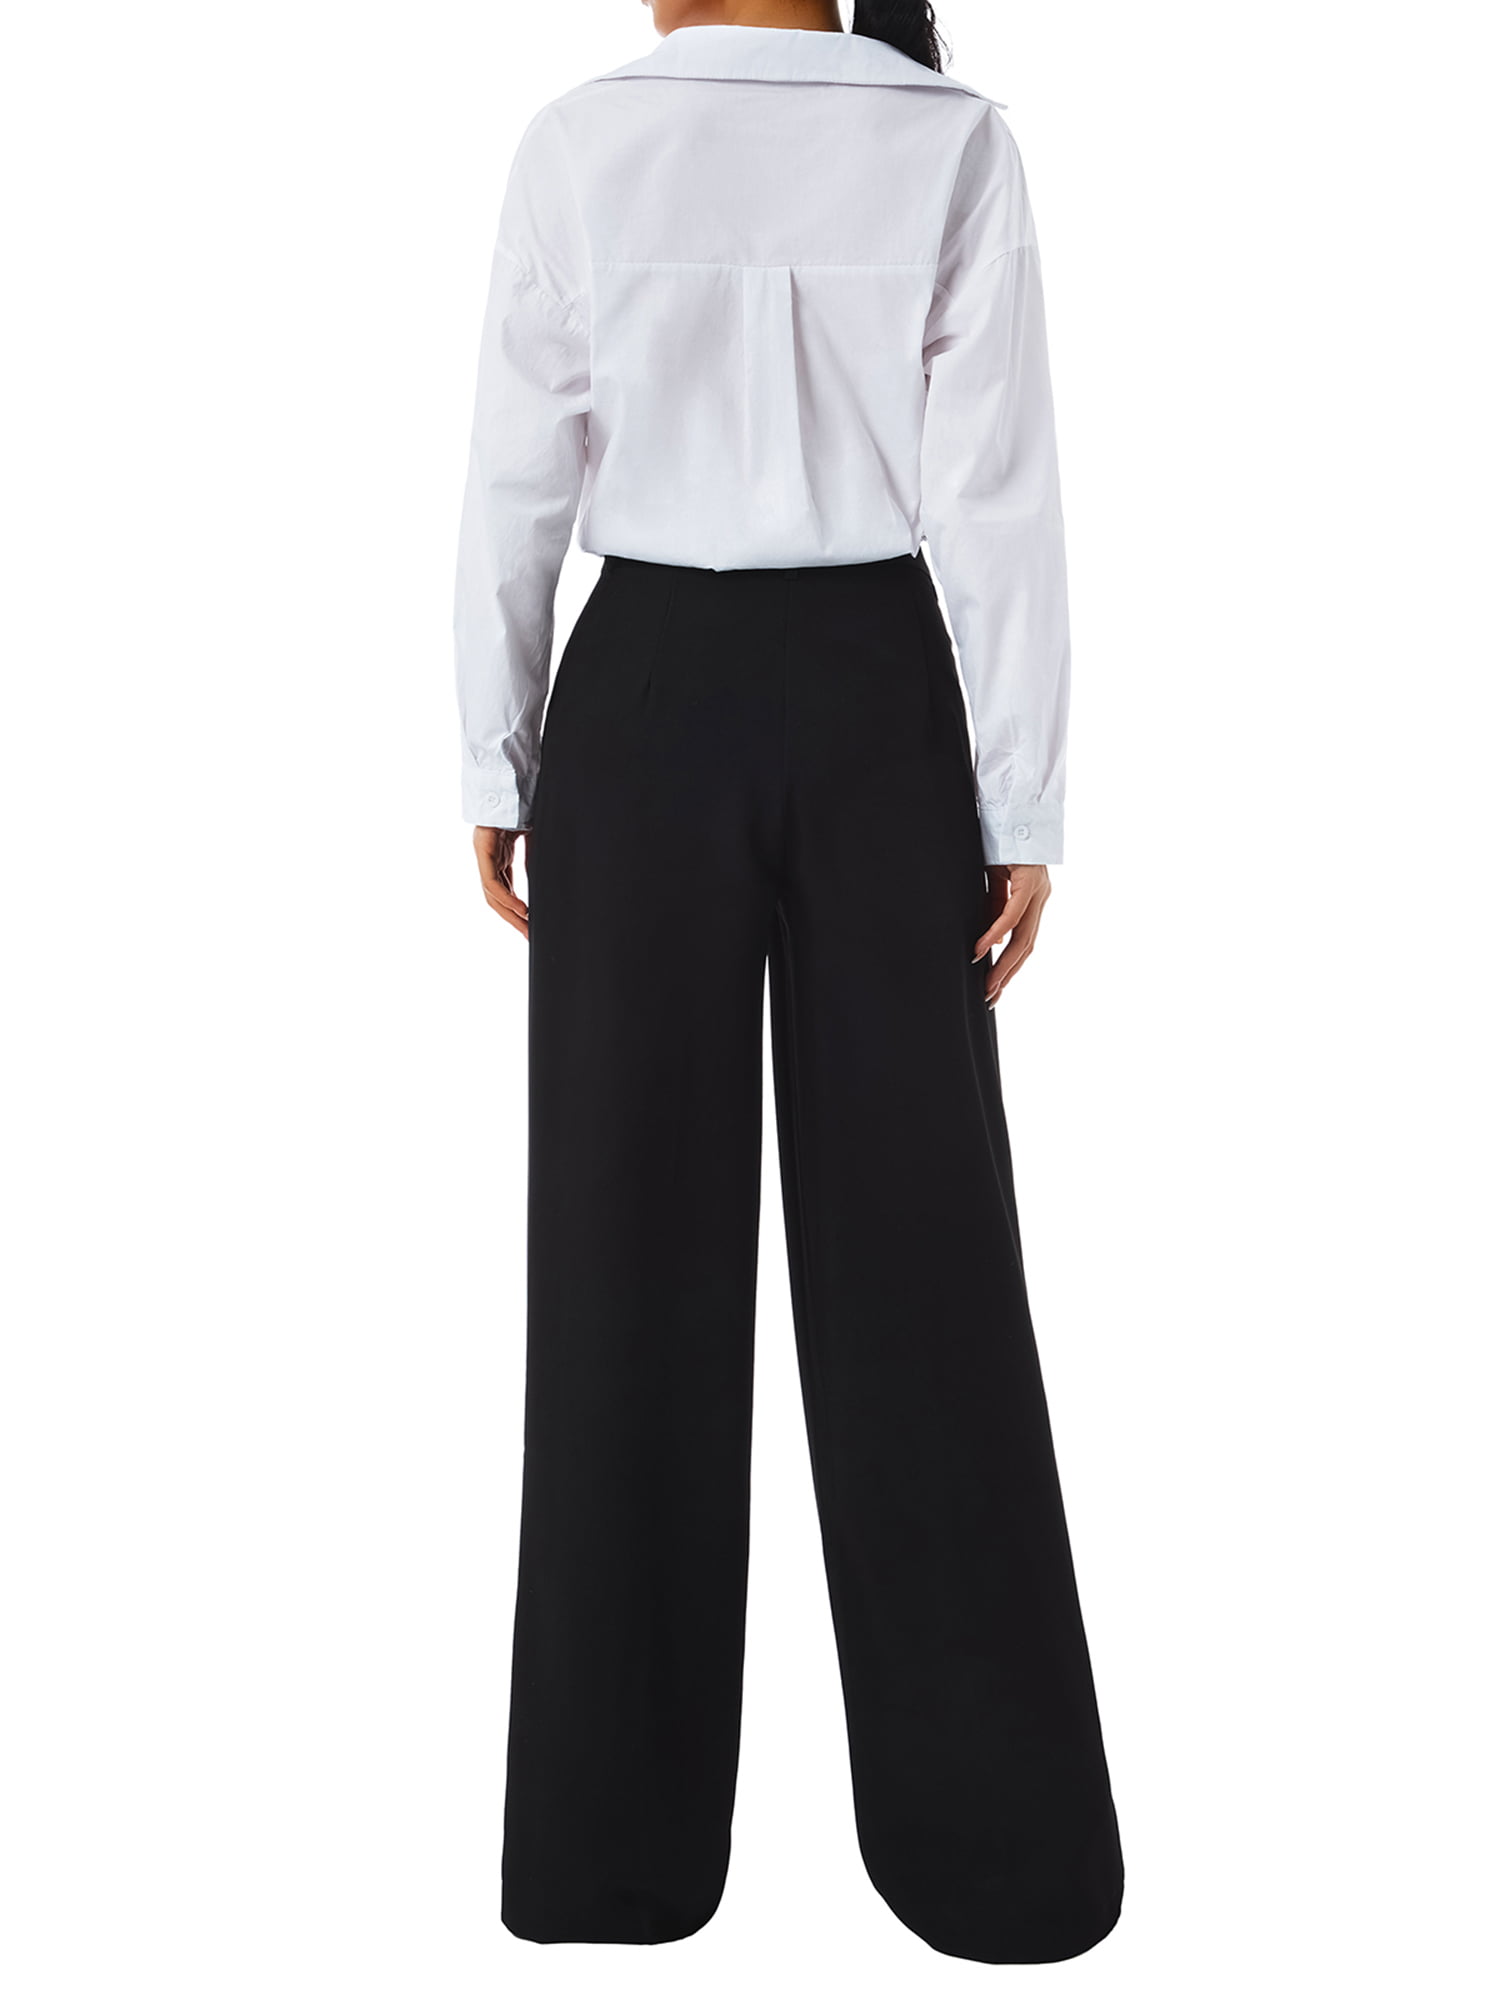 wybzd Women High Waist Wide Leg Pants Straight Leg Suit Pant Office Casual  Loose Pants with Pockets Black L 